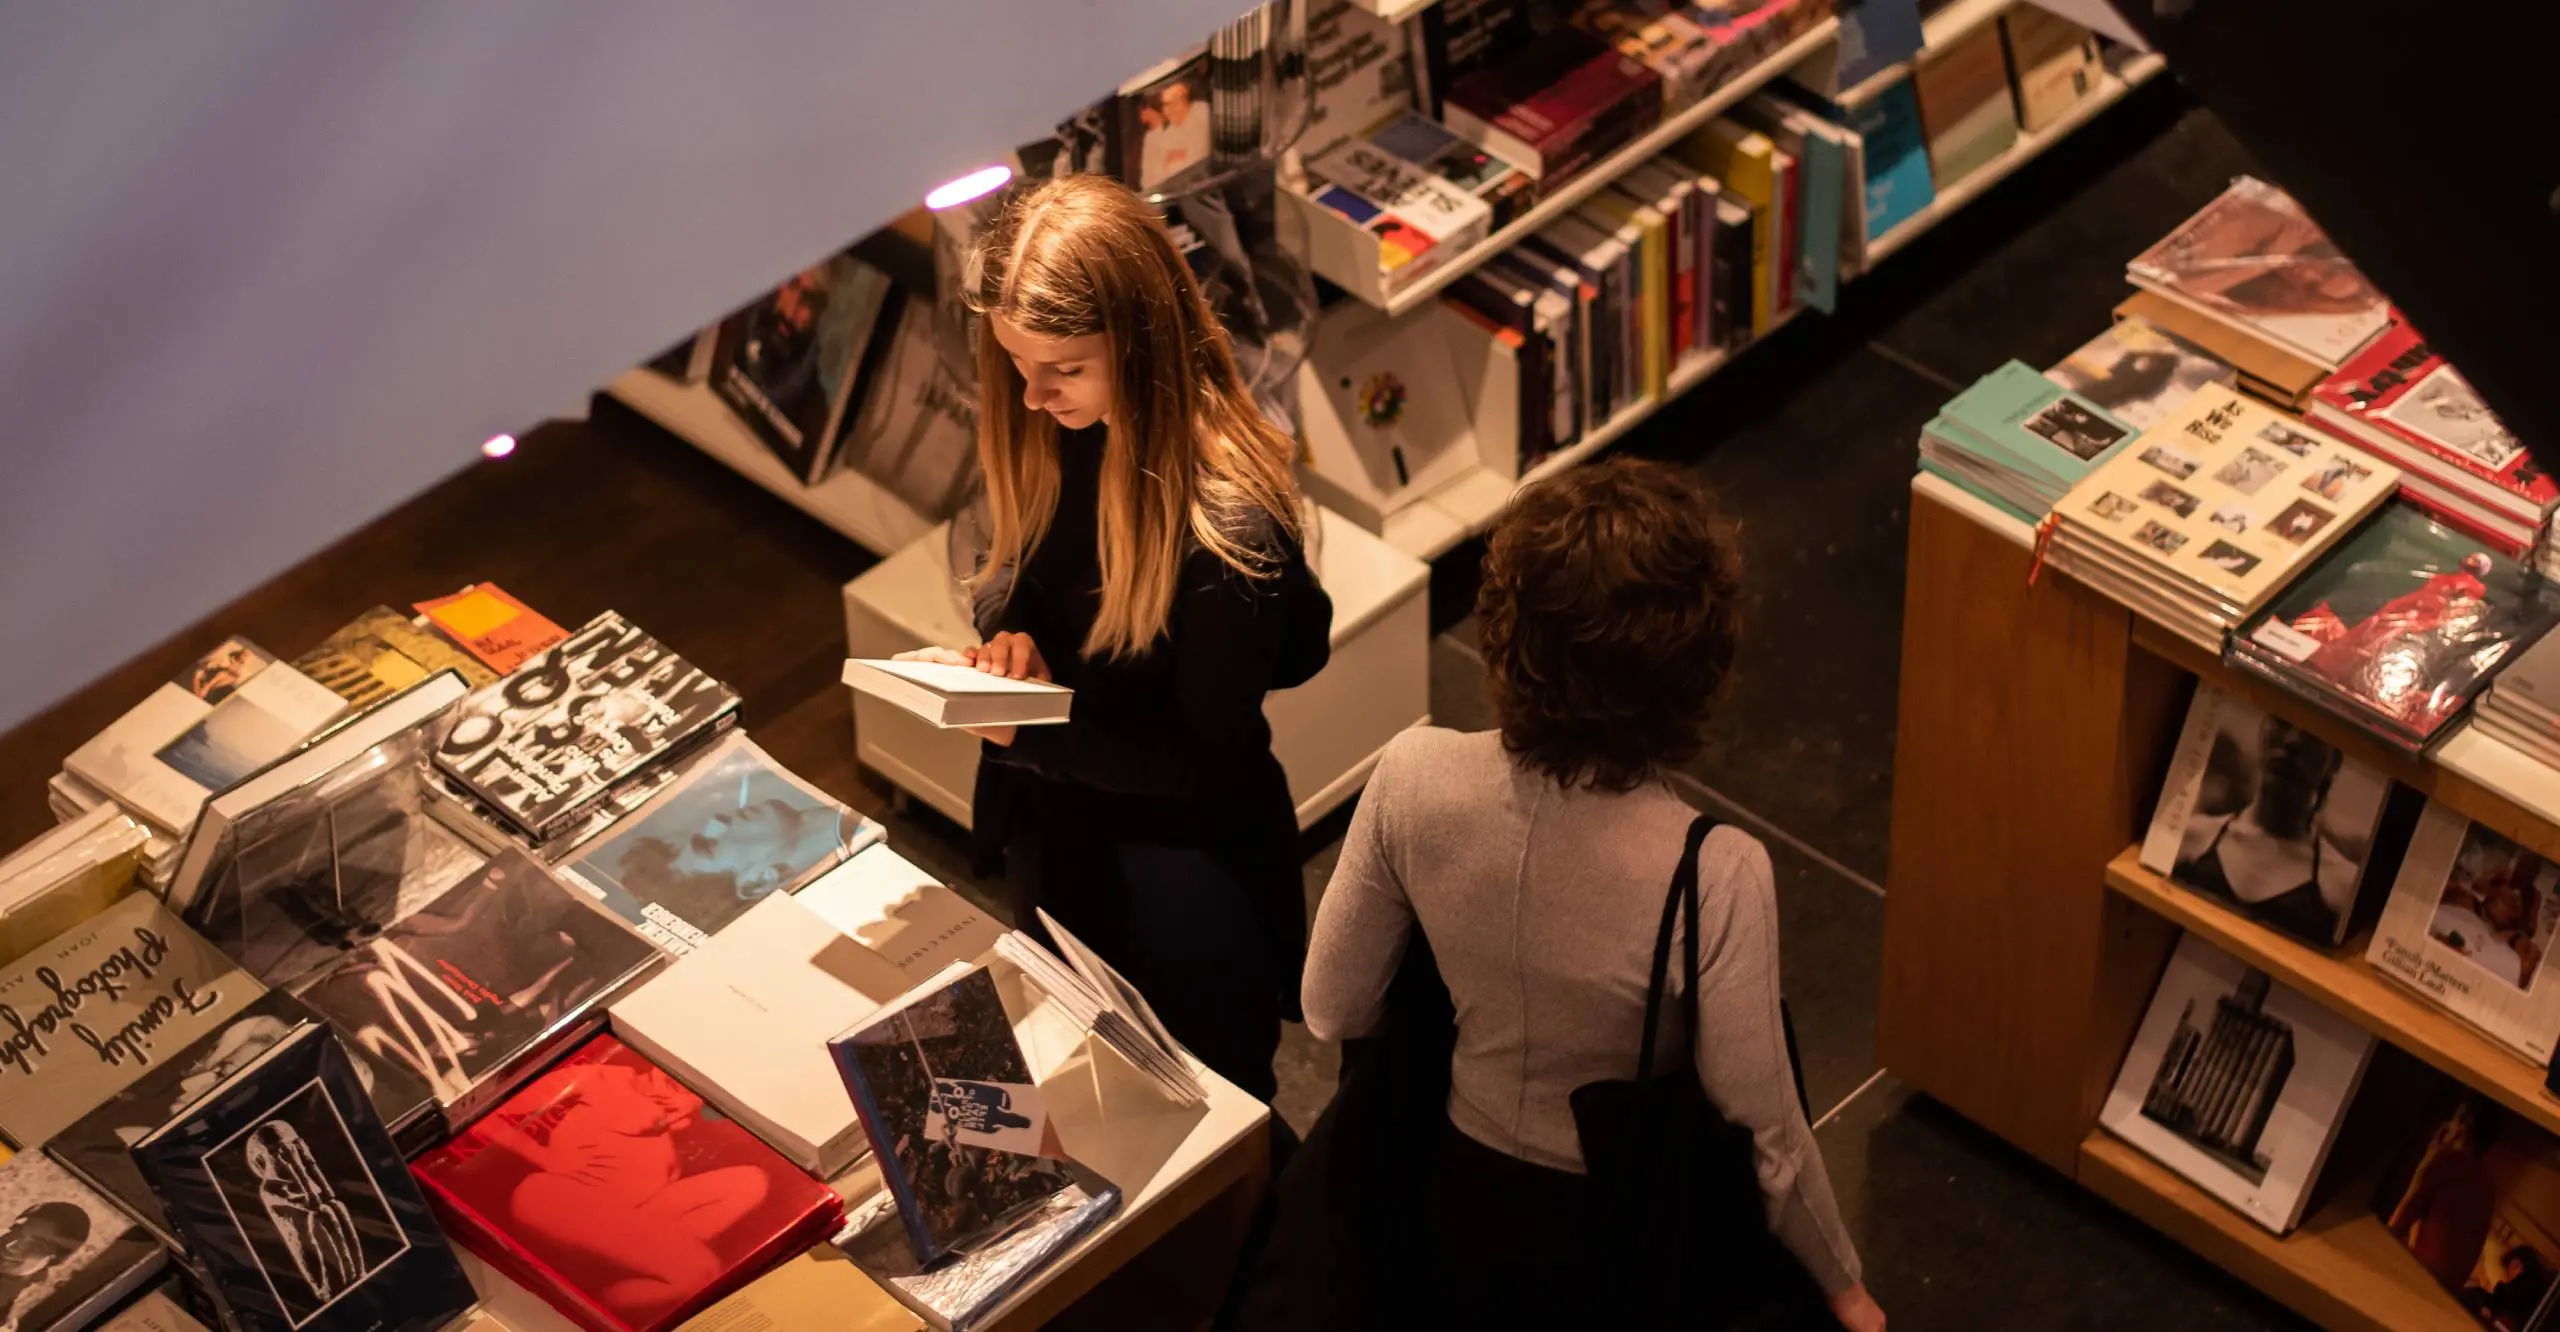 Colour photograph of two people looking at books in a bookshop